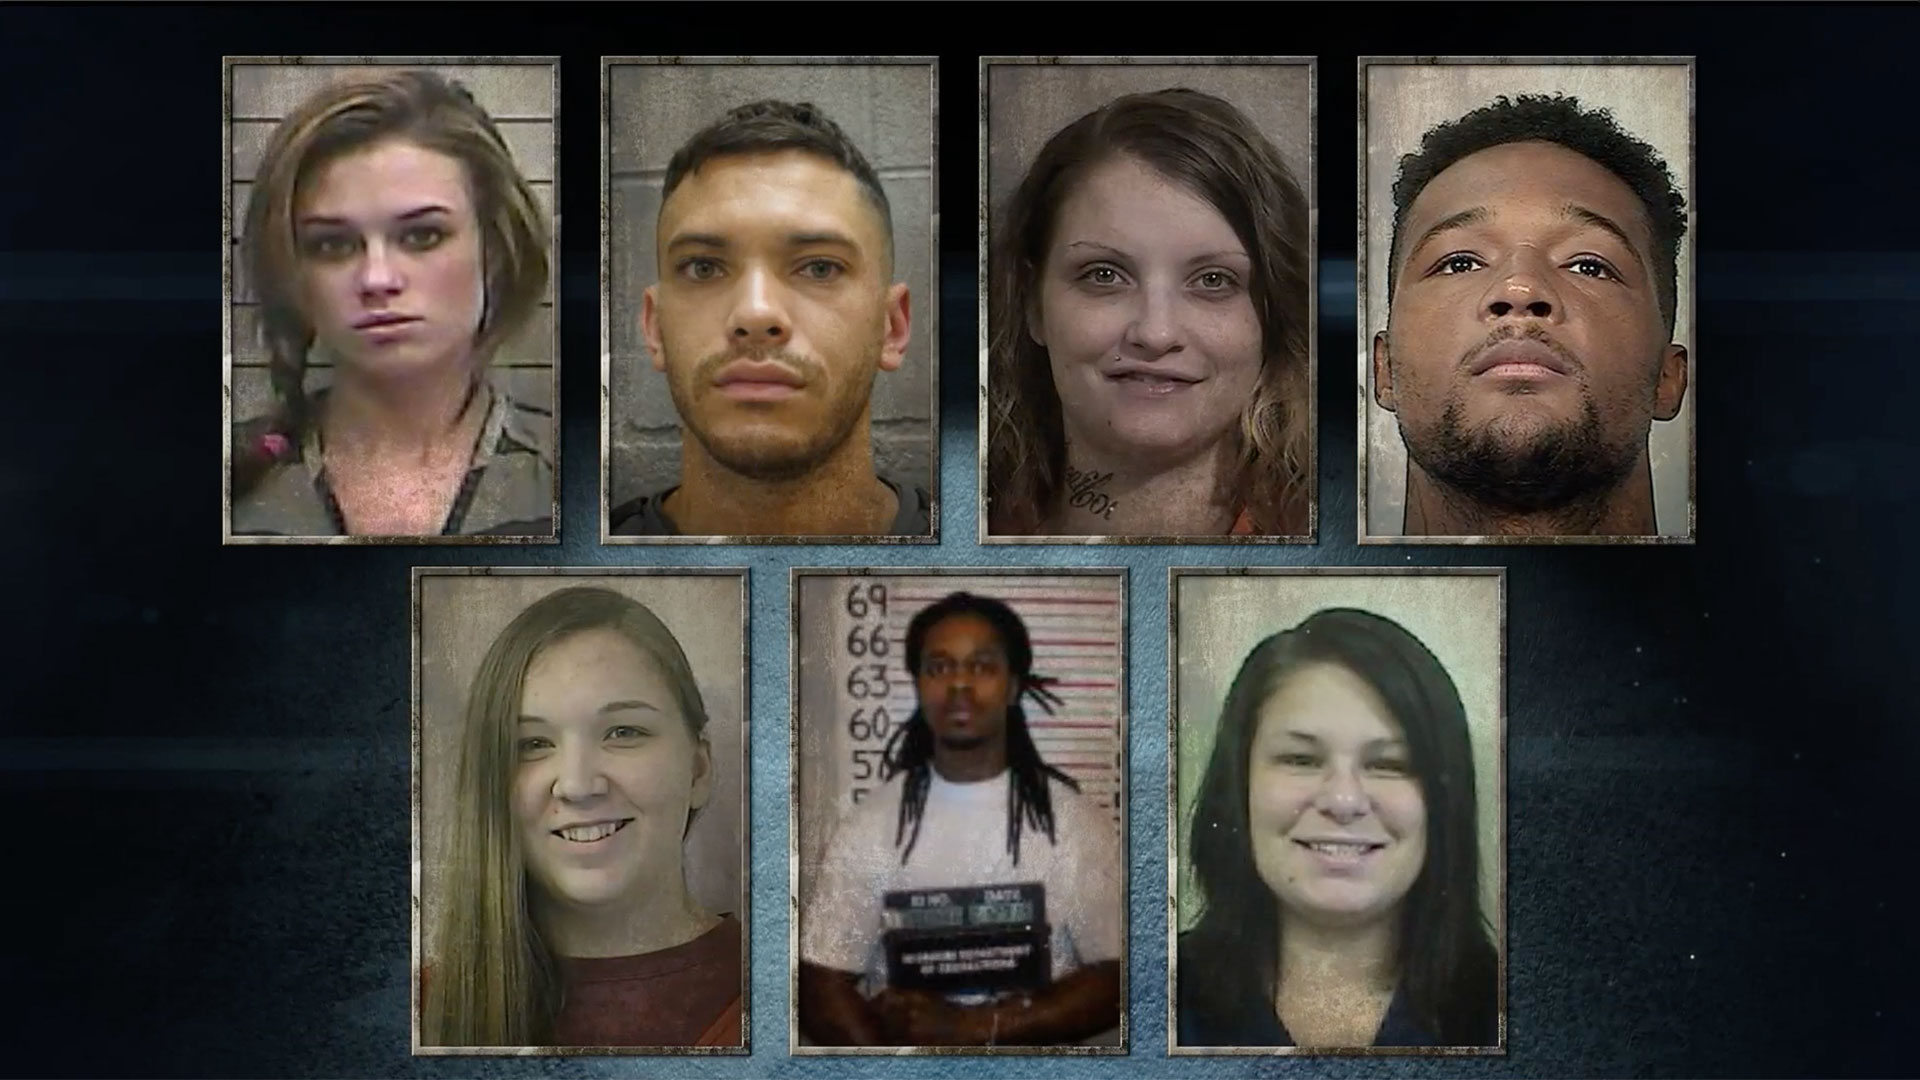 Watch Mugshot: Hot or Not? | Love After Lockup Video Extras